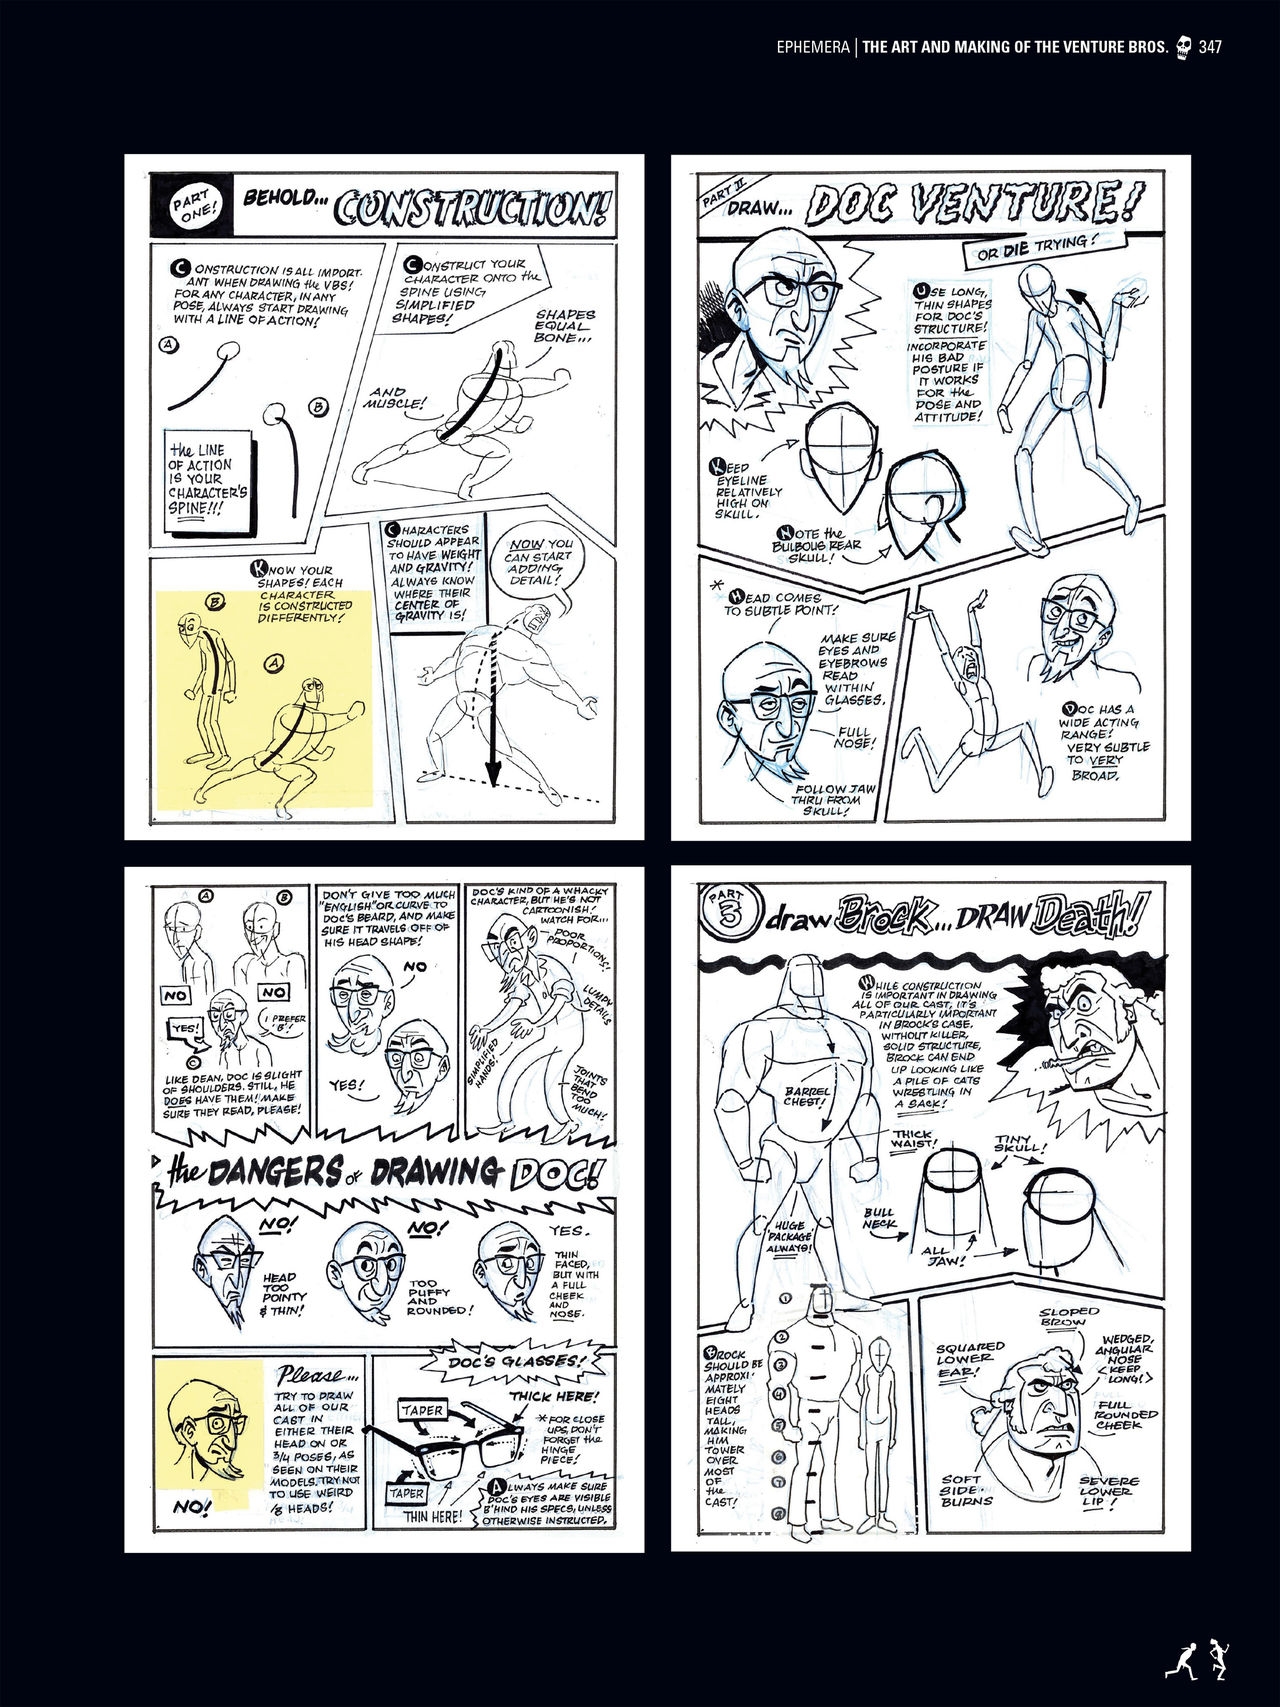 Go Team Venture! - The Art and Making of the Venture Bros 345